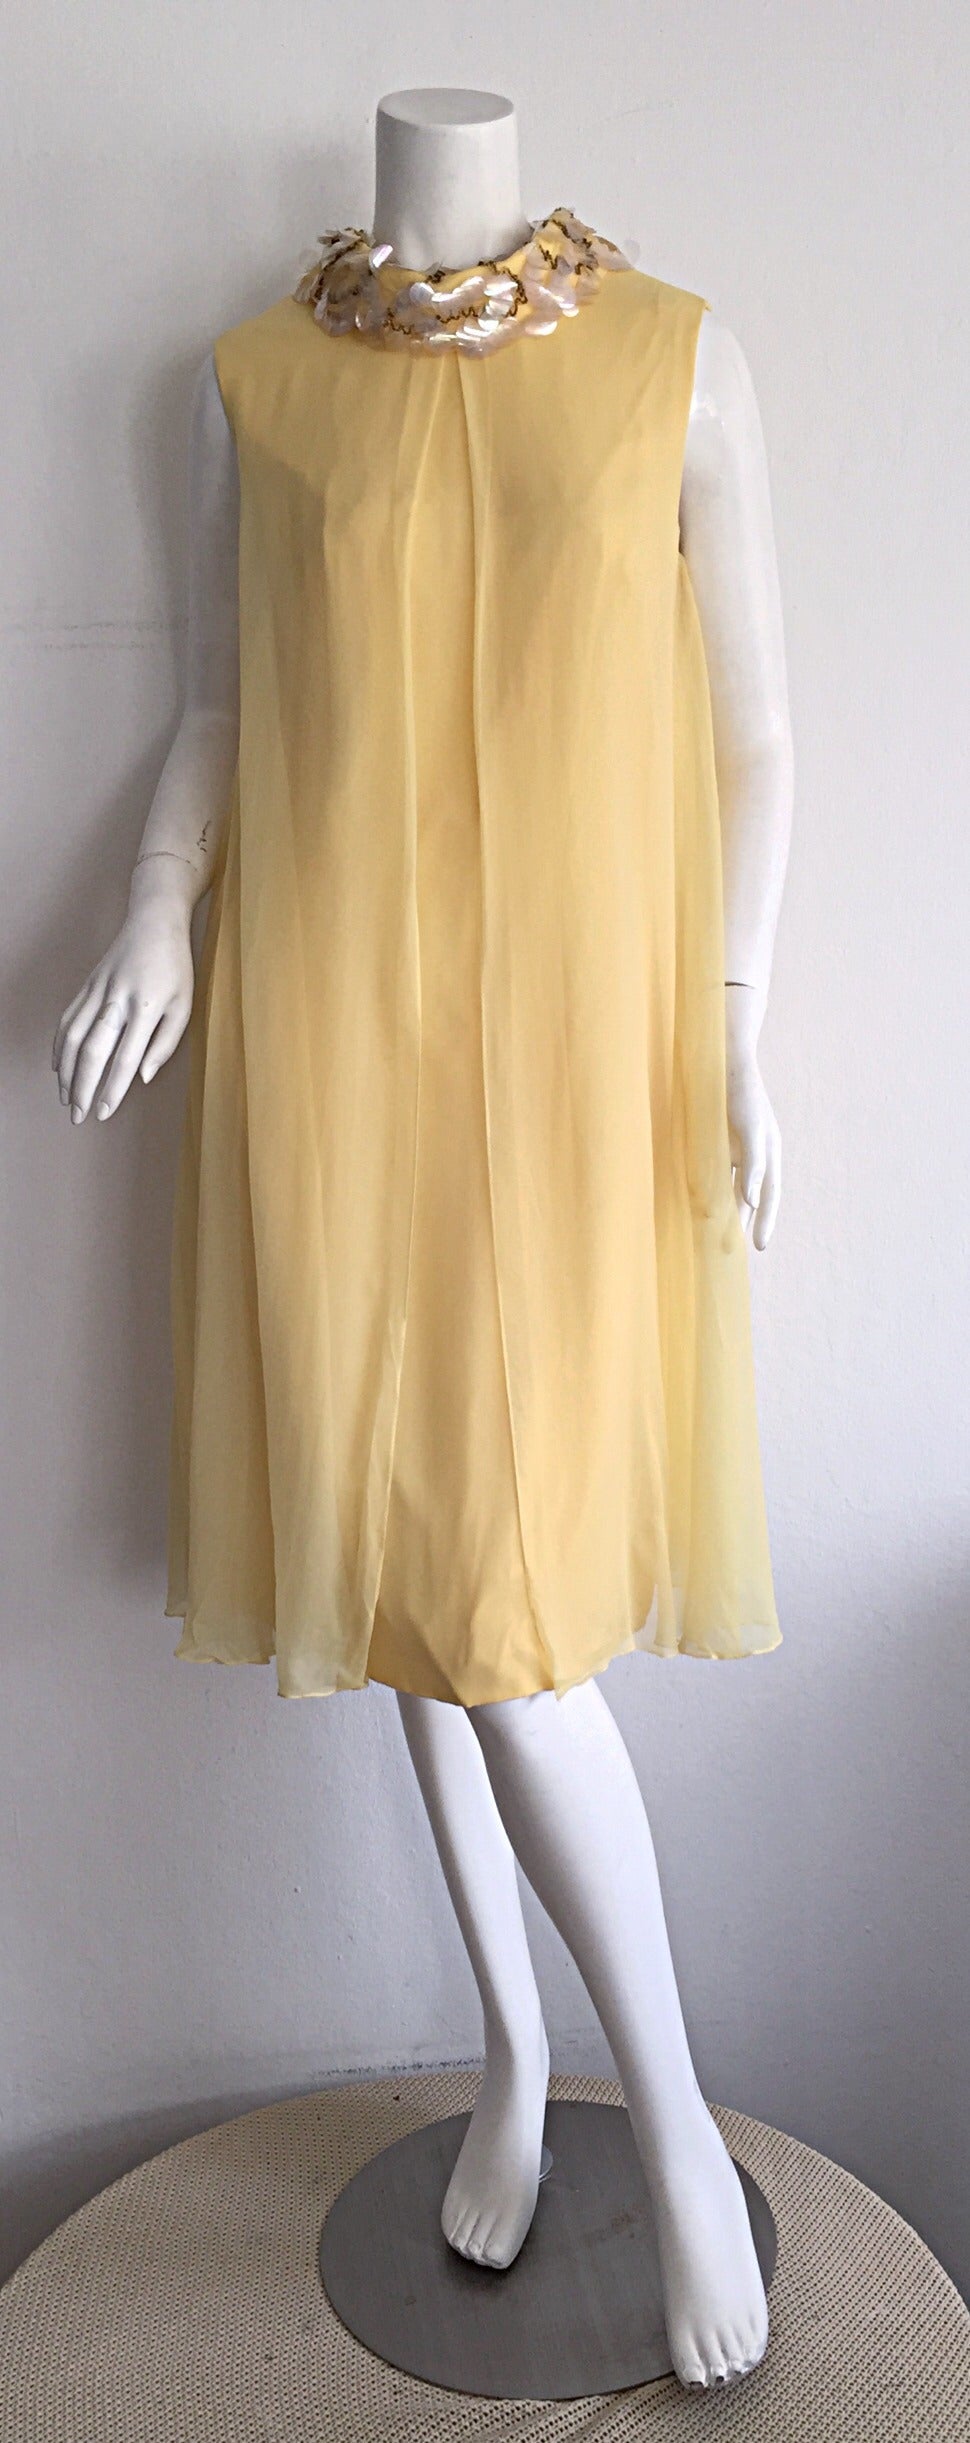 Cutest 1960s vintage Lisa Howard canary yellow chiffon dress! Palliates and beads encrusted around the neck collar. Two panels of chiffon that separate at the front, to form an amazing flowy effect. Metal zipper up the back. Can easily go from day